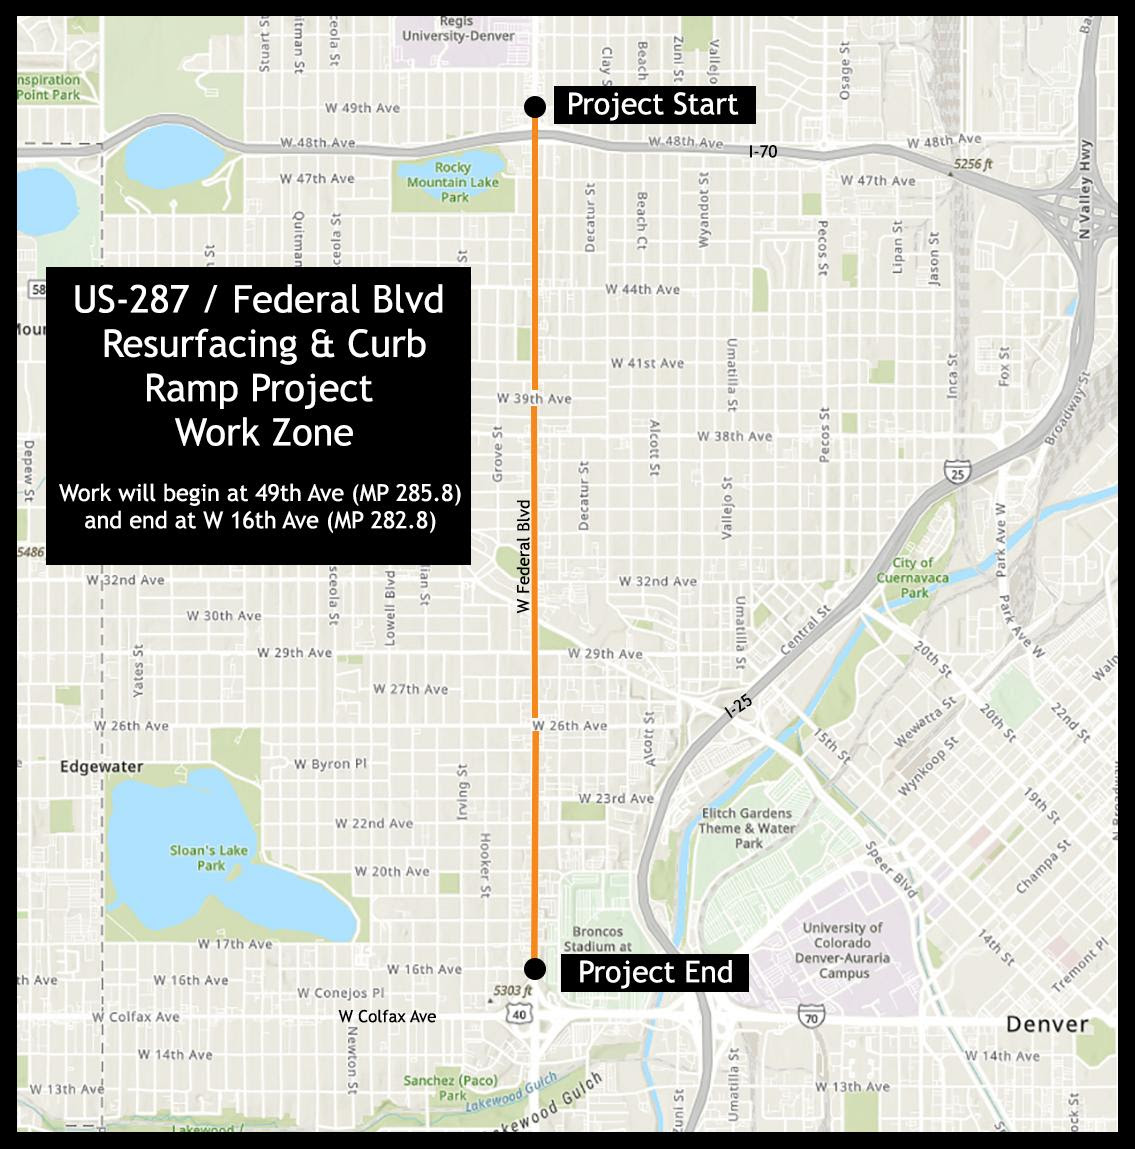 US 287/Federal Boulevard Resurfacing and Curb Ramp Project project map detail image